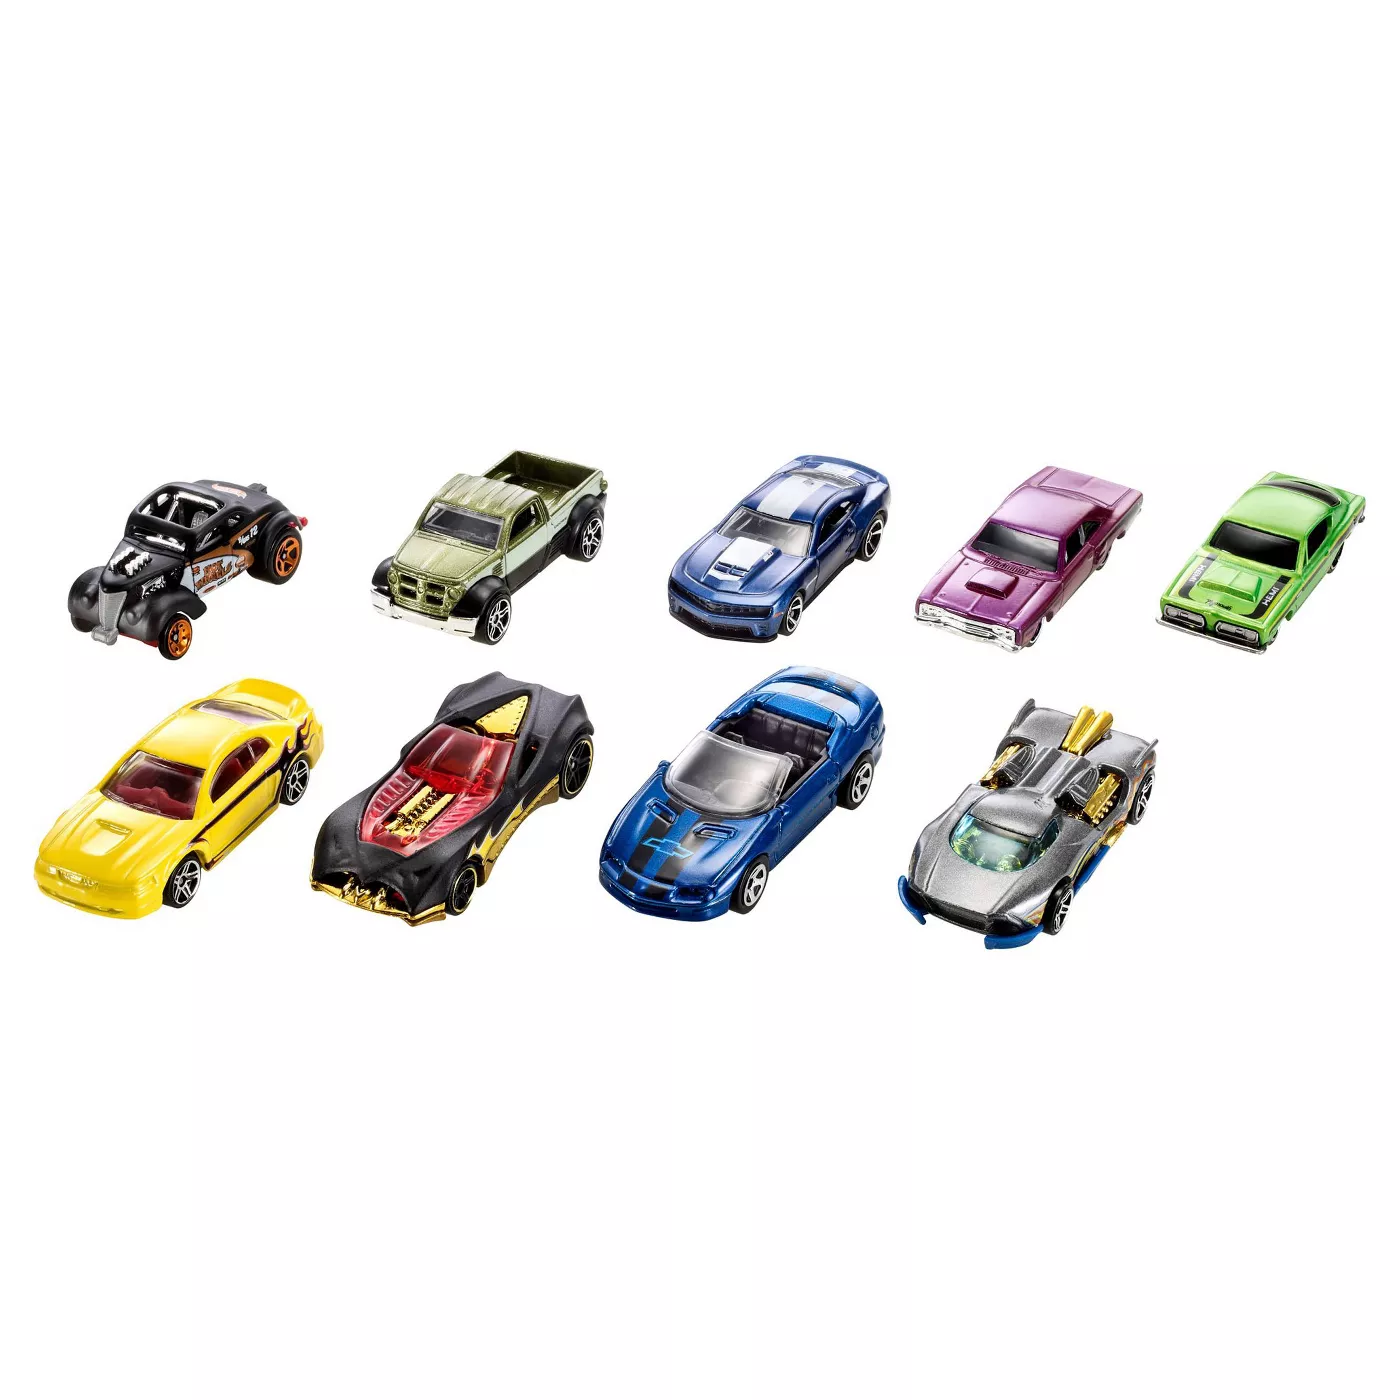 Hot Wheels Diecast 9 Car Gift Pack - image 2 of 10